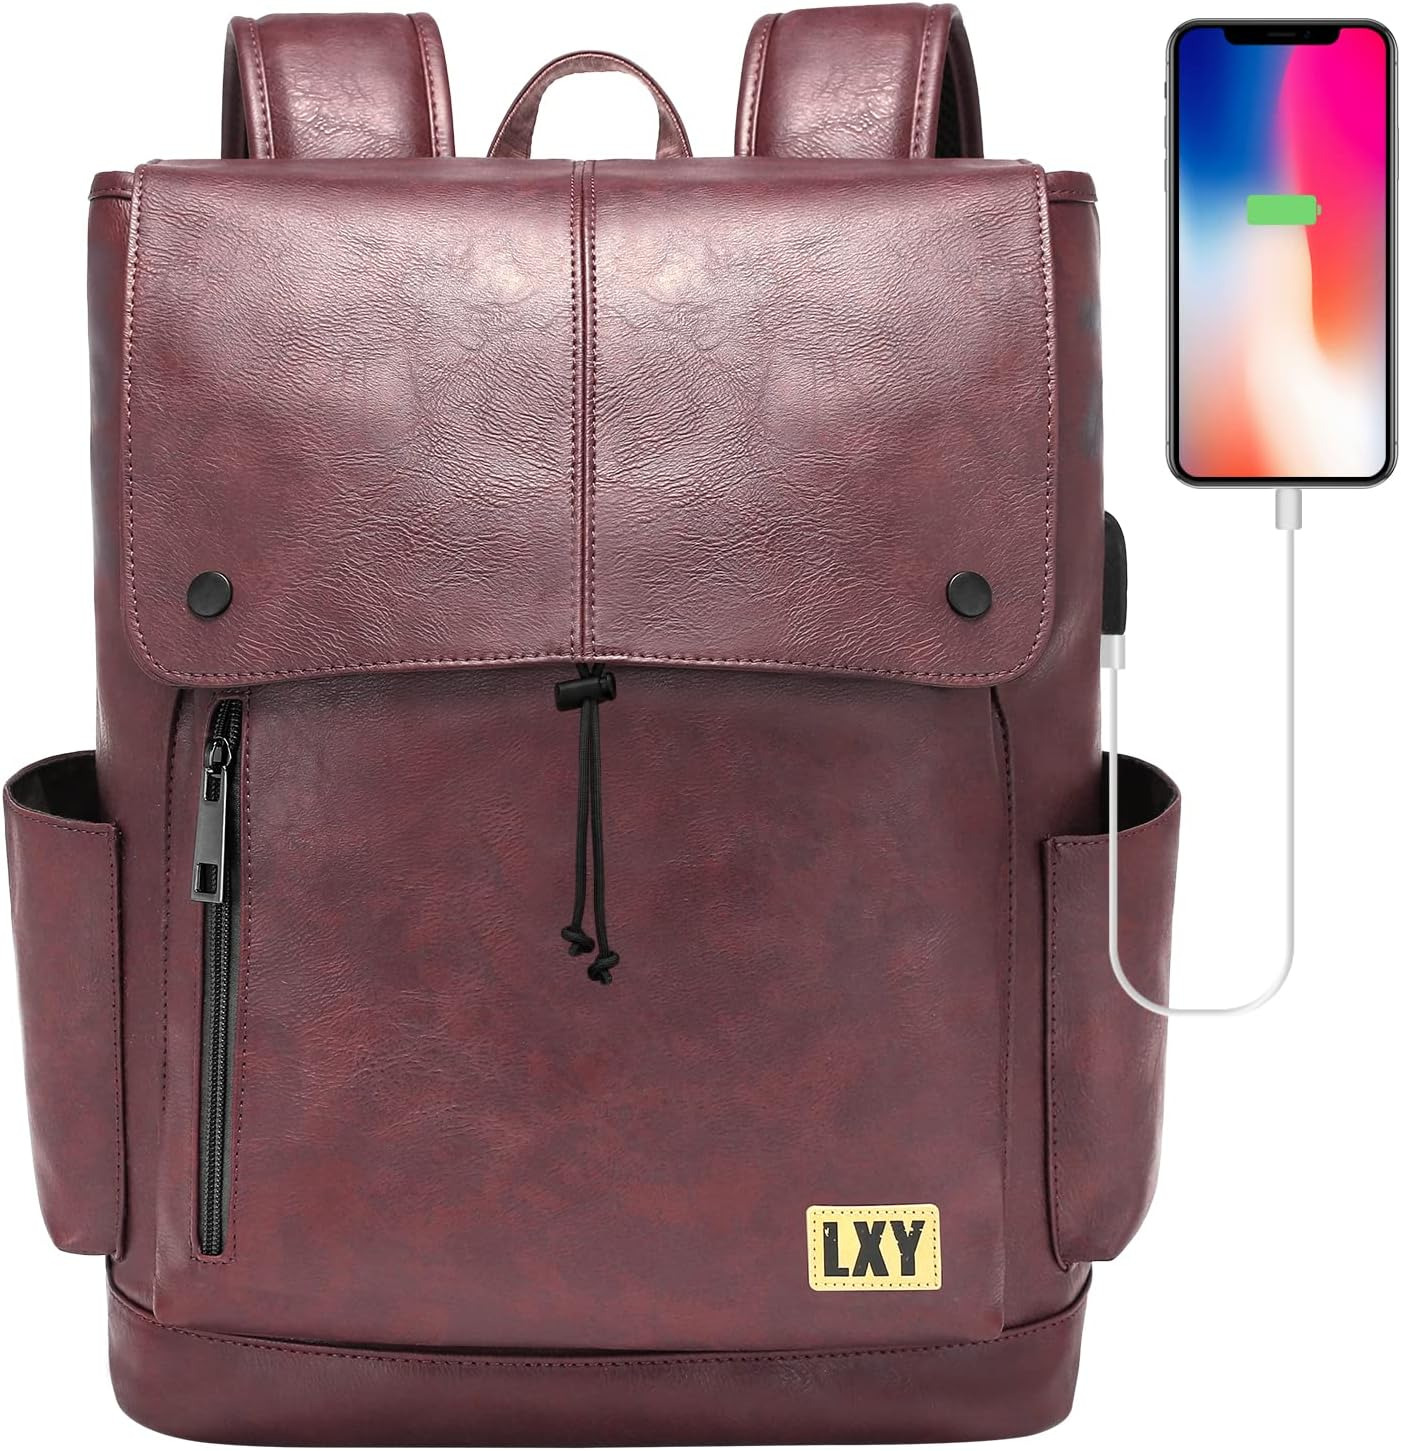 Leather Laptop Backpack Women Vintage Travel Computer Backpack with USB Charg...